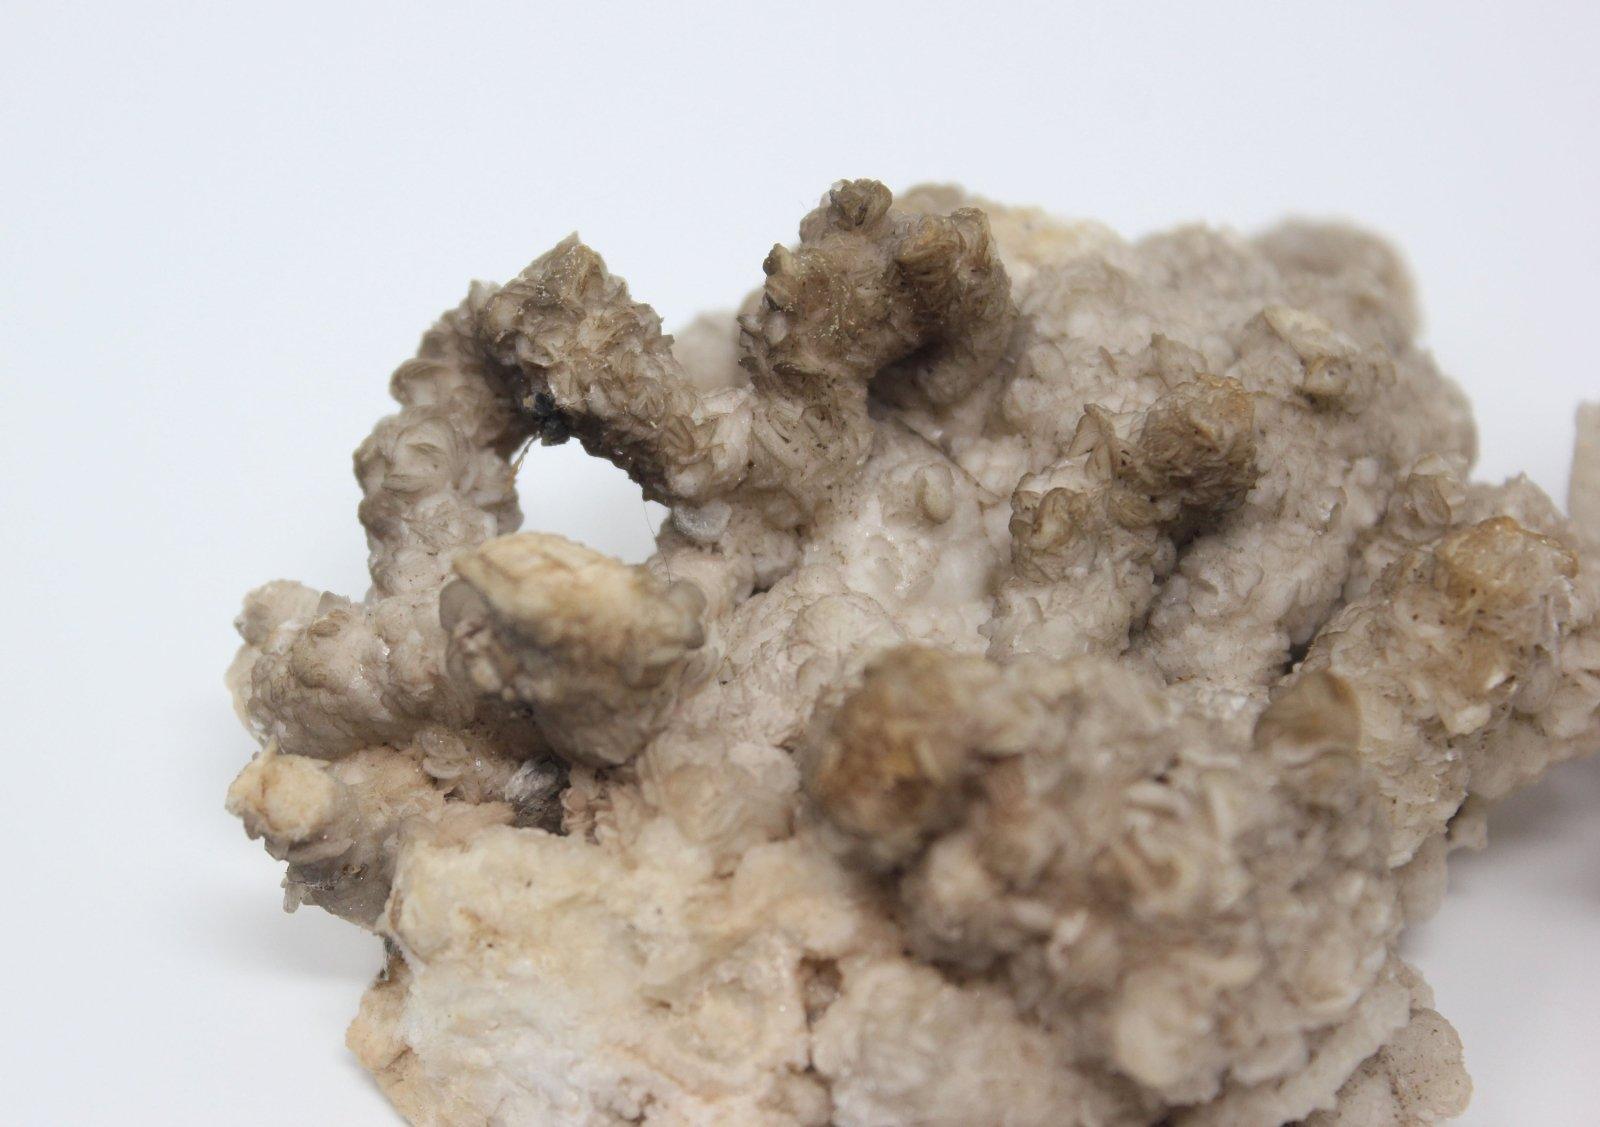 RARE White Aragonite Crystal Cluster Formation! GORGEOUS!!! - LapidaryCentral